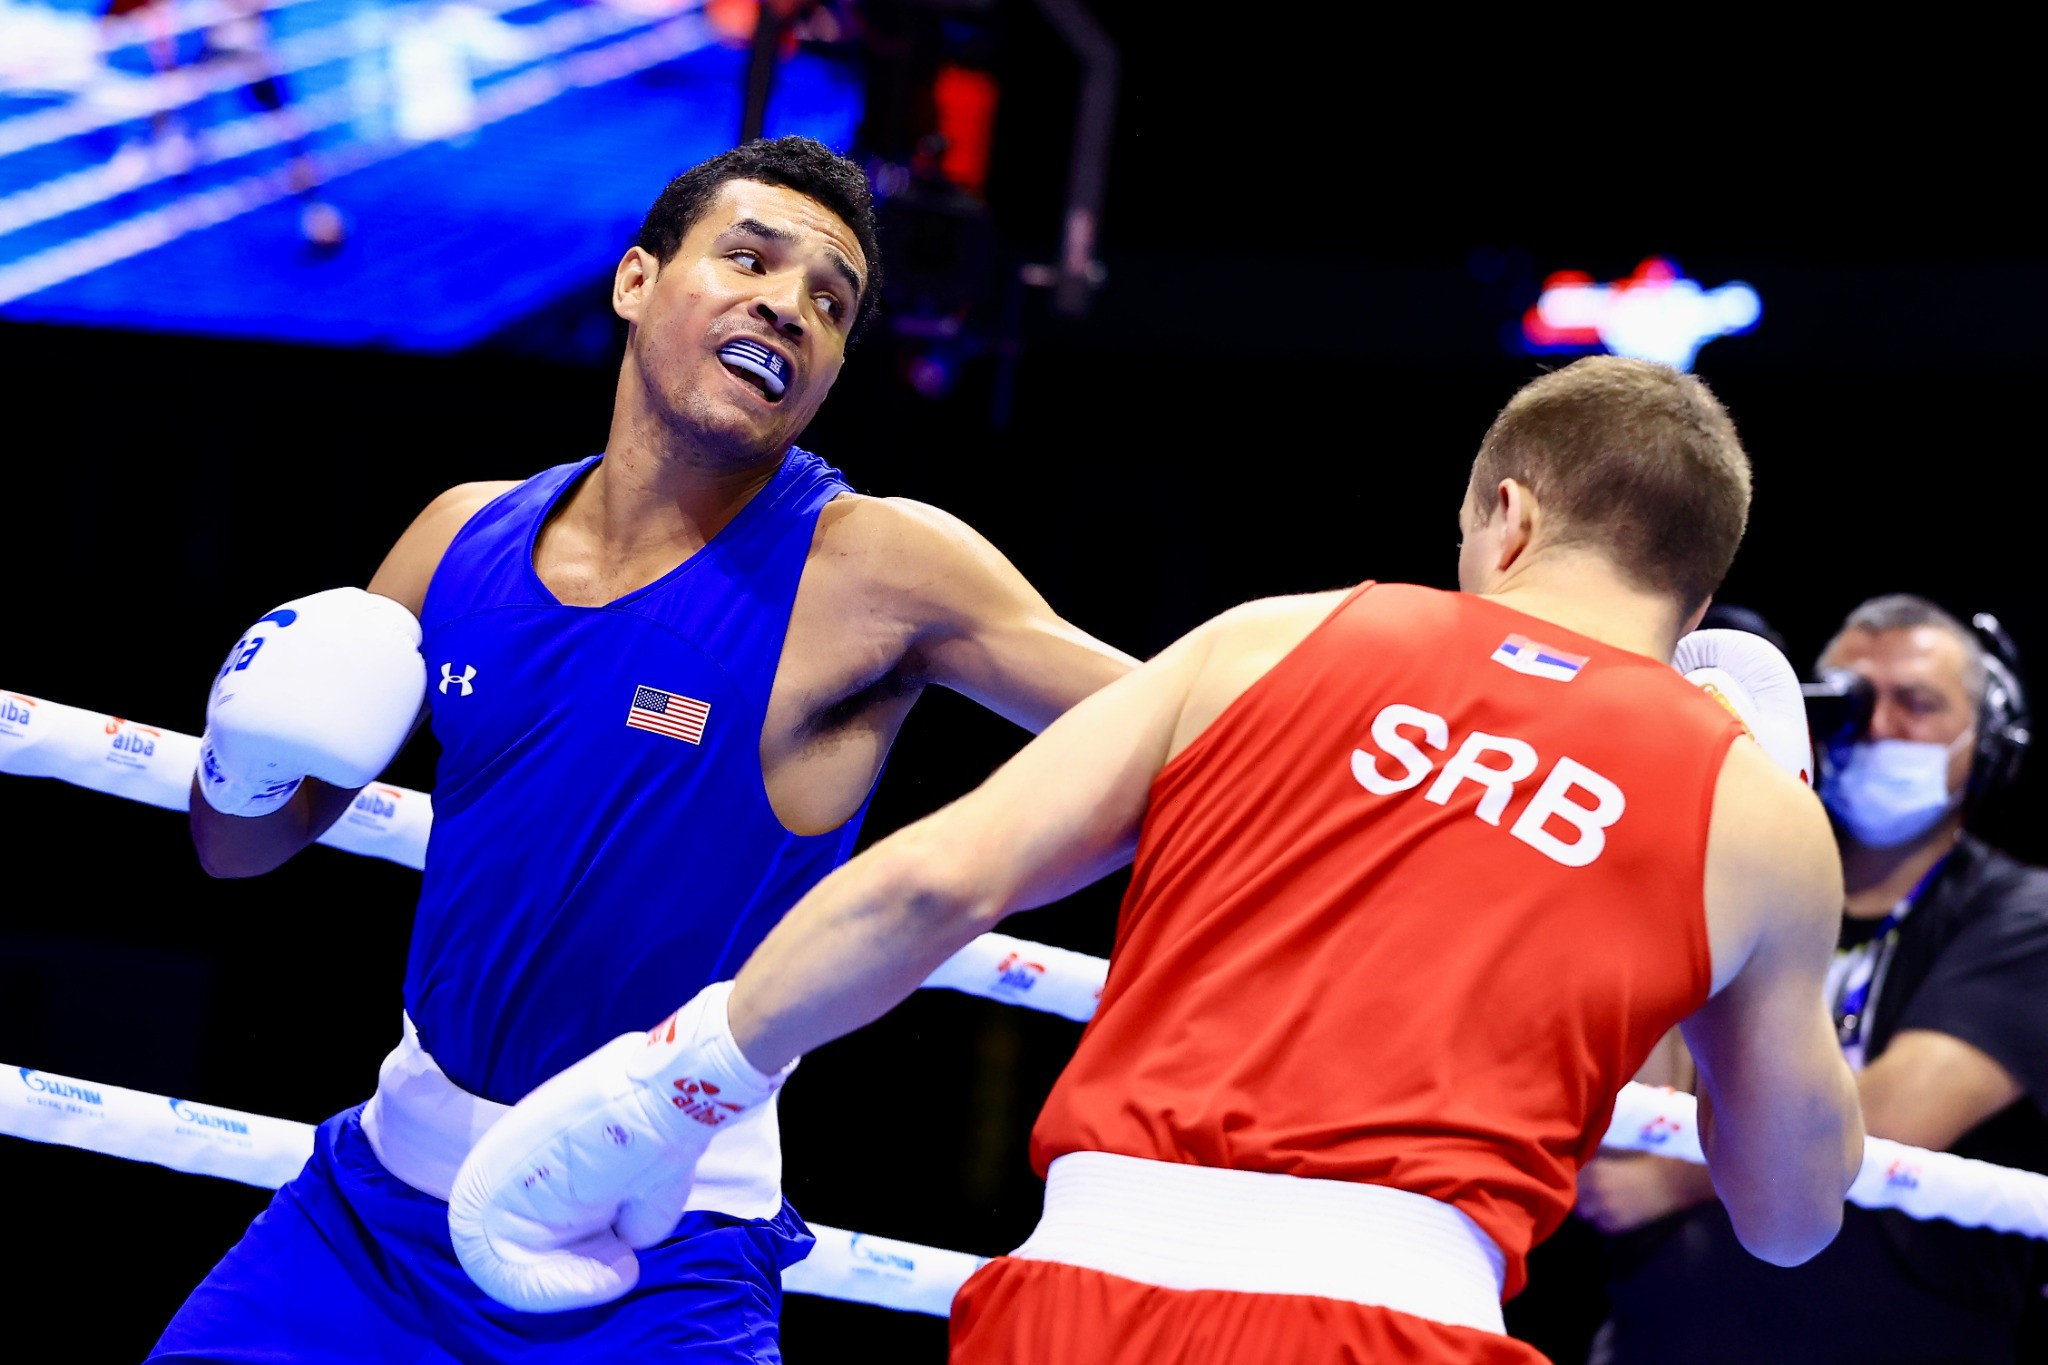 Robby Gonzales ended hopes of a Serbian gold by beating Vladimir Mironchikov in the under-80kg ©AIBA